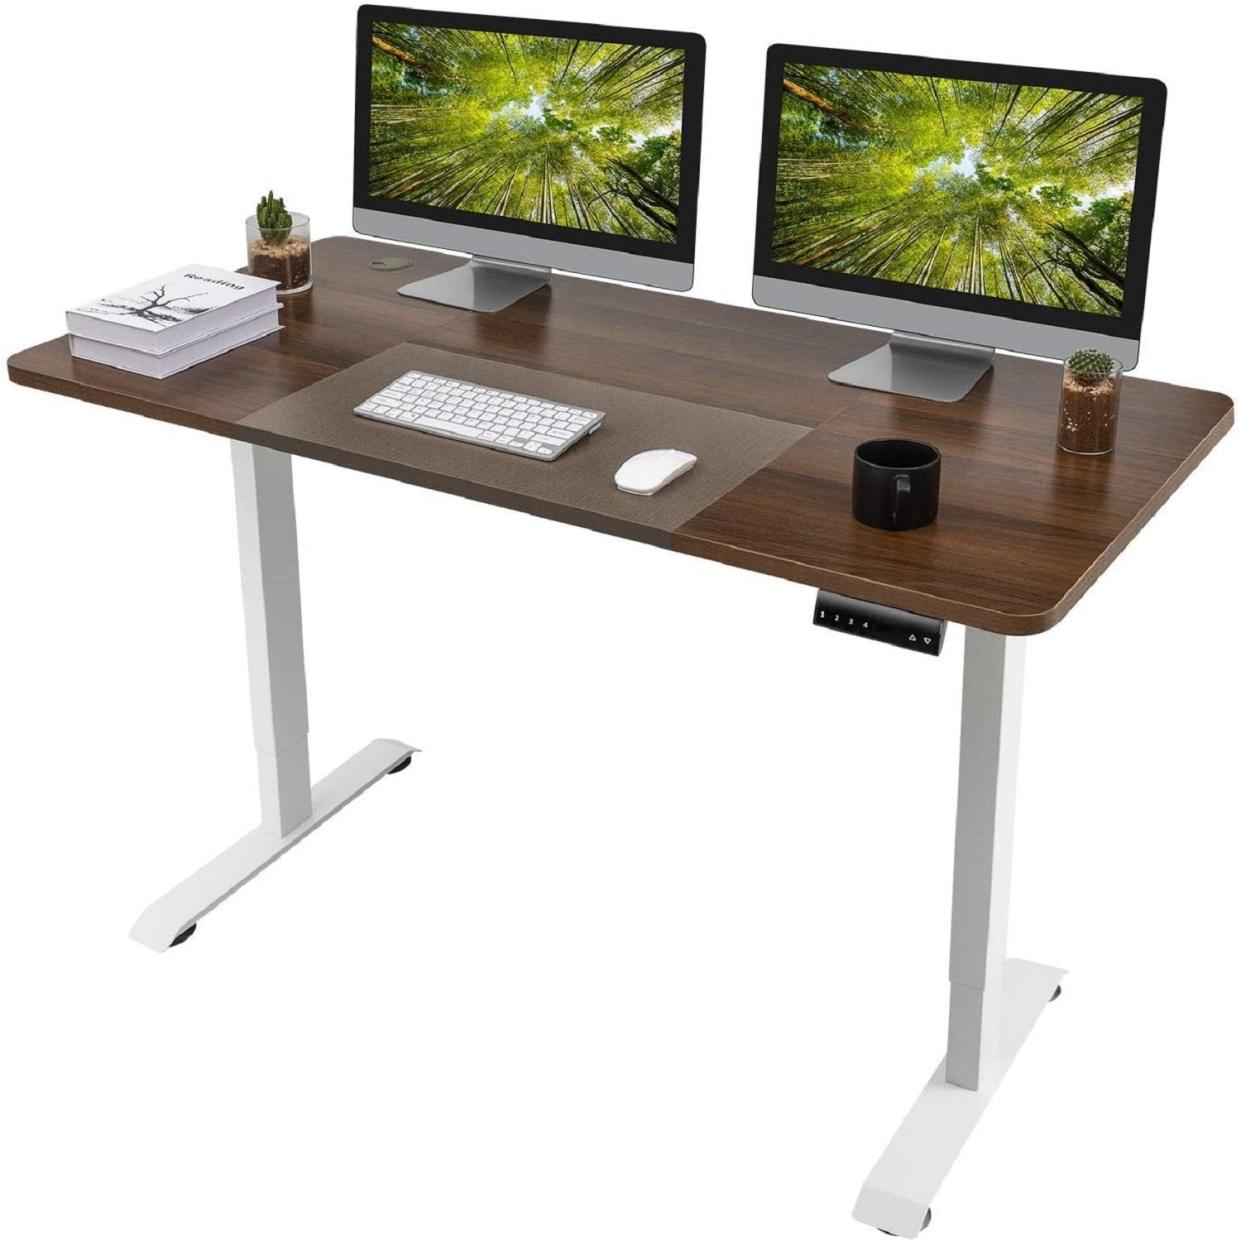 What Are Some Tips for Using an Electric Height Adjustable Desk Safely?